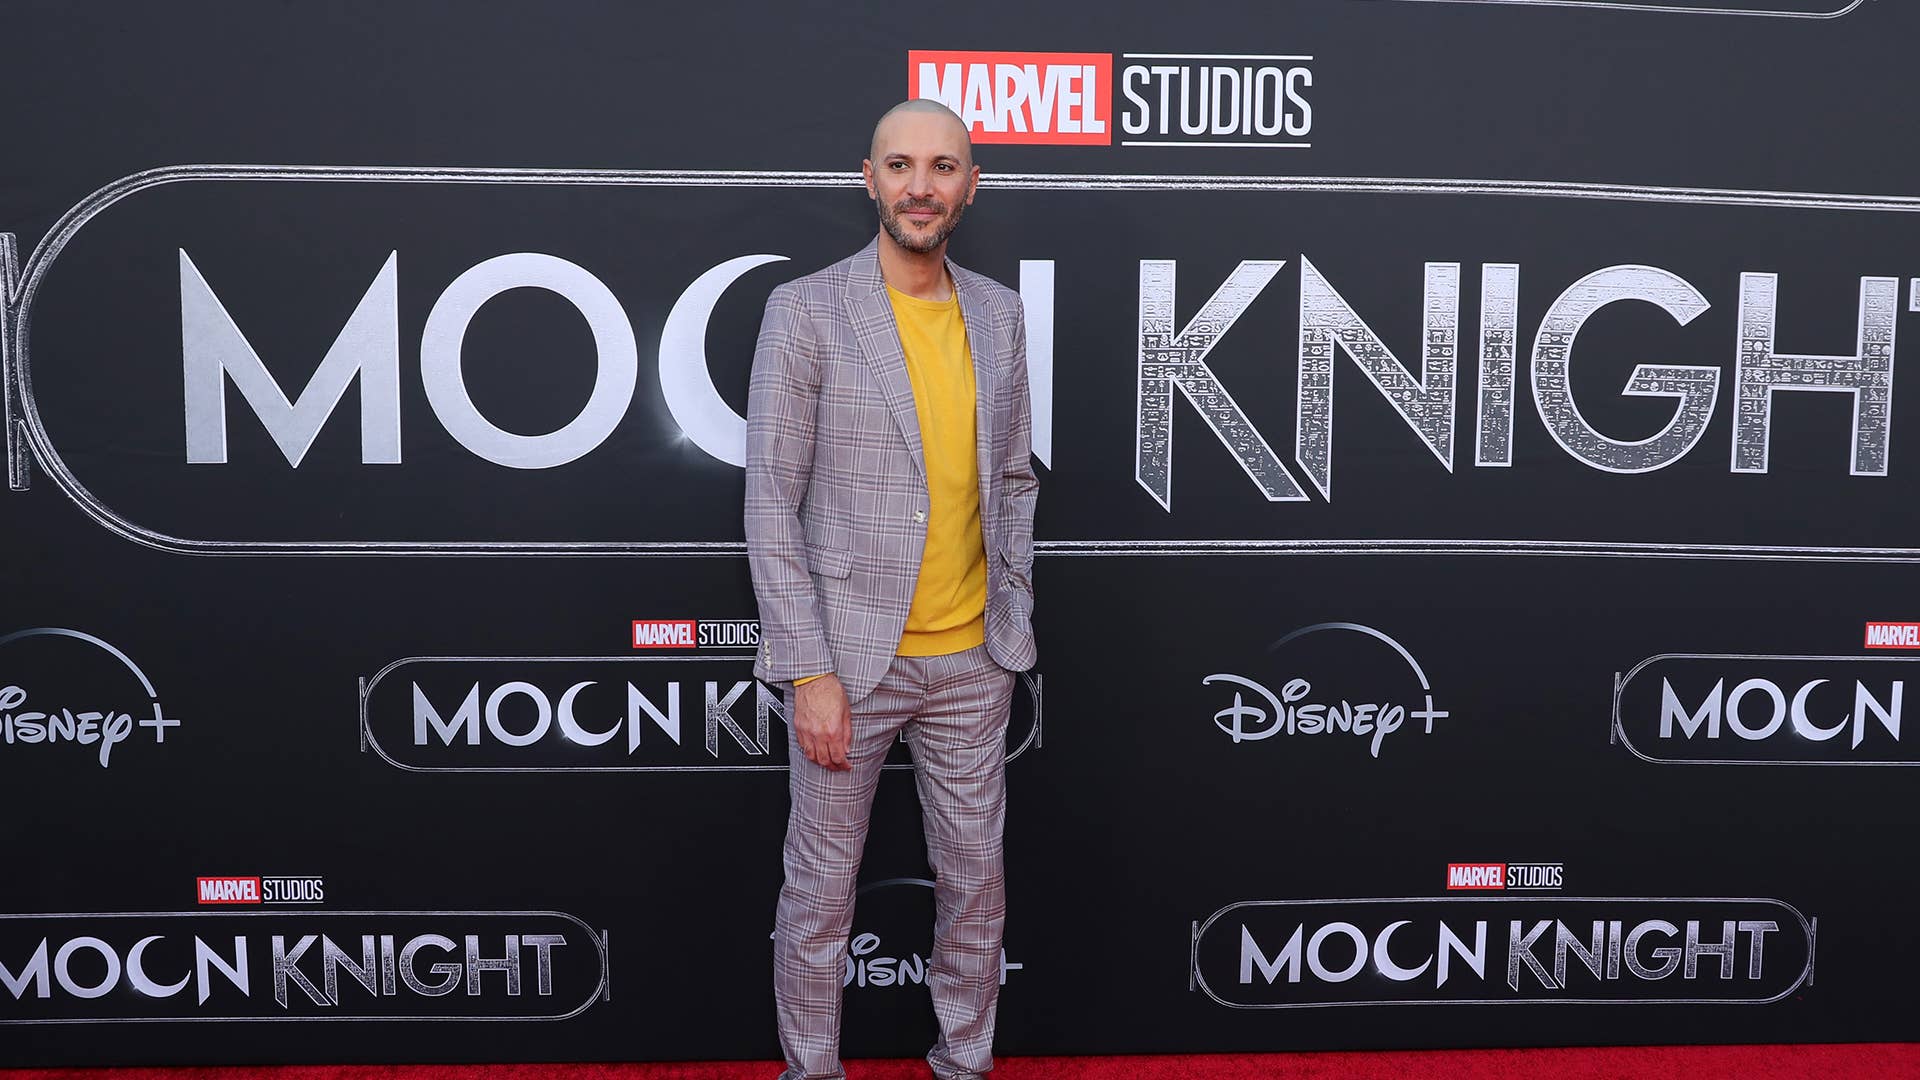 'Moon Knight' director Mohamed Diab at the premiere for the Disney+ series